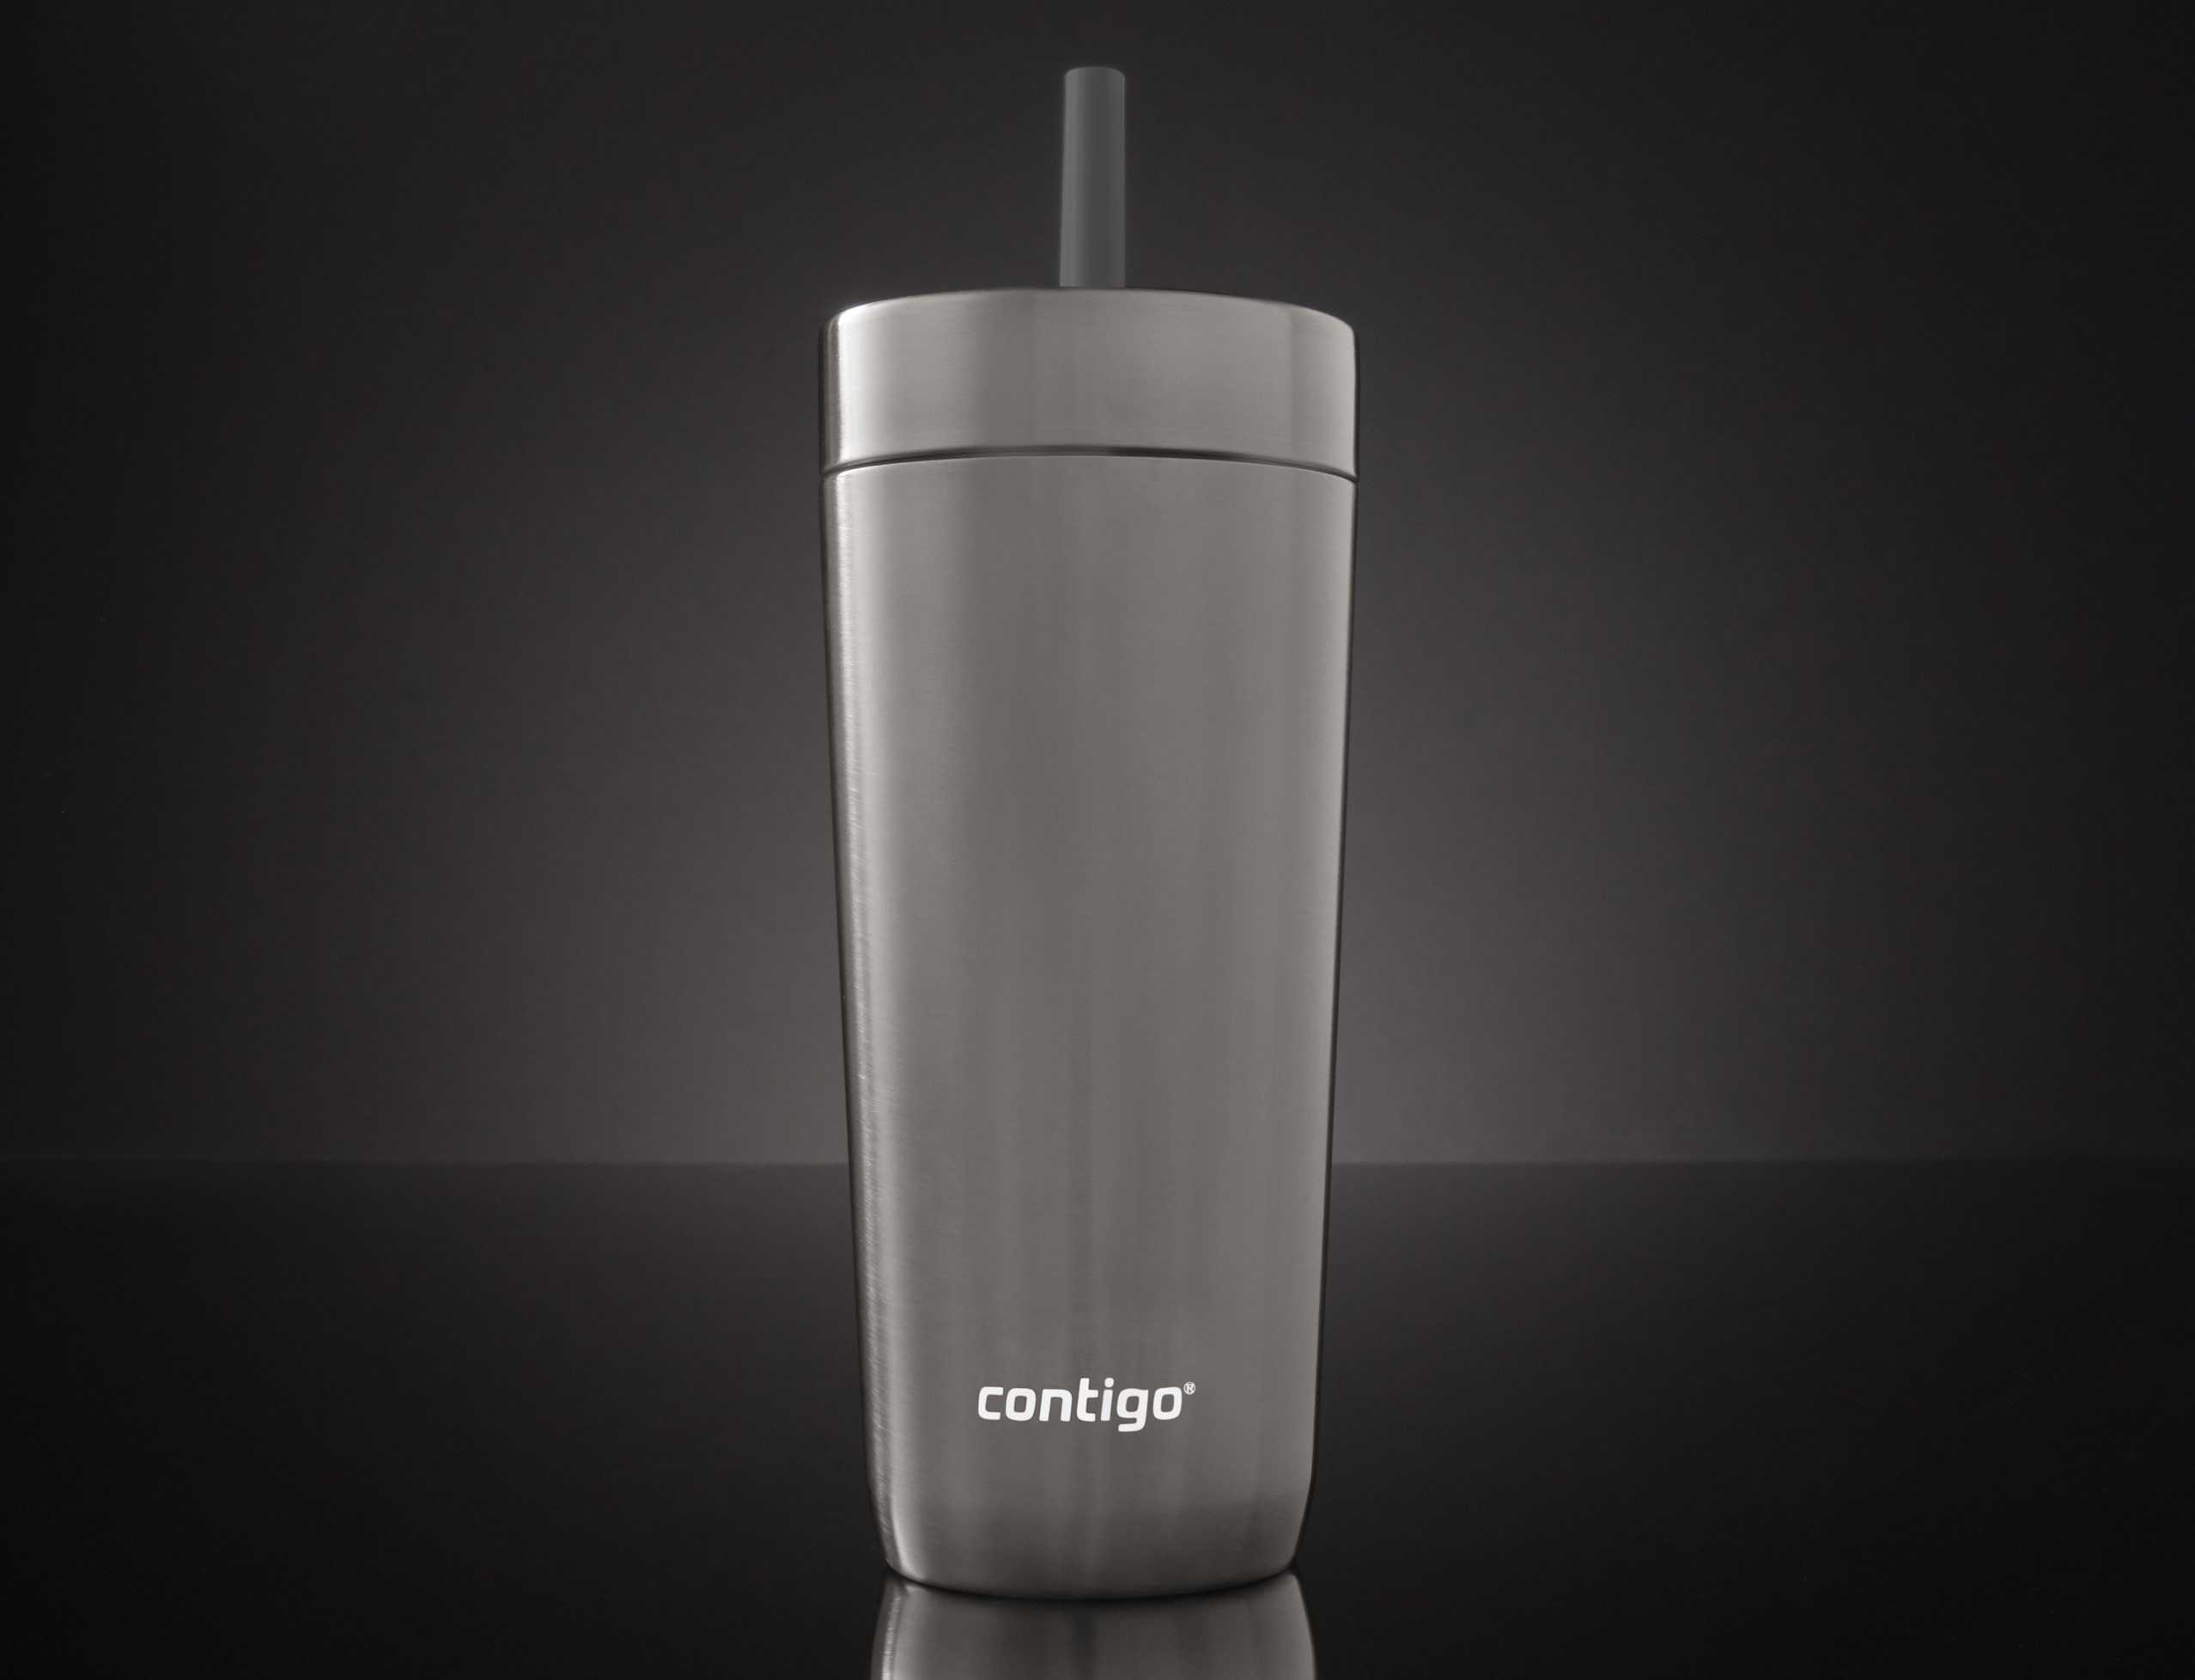 Contigo introduces Luxe Collection with travel mug and spill-proof tumbler